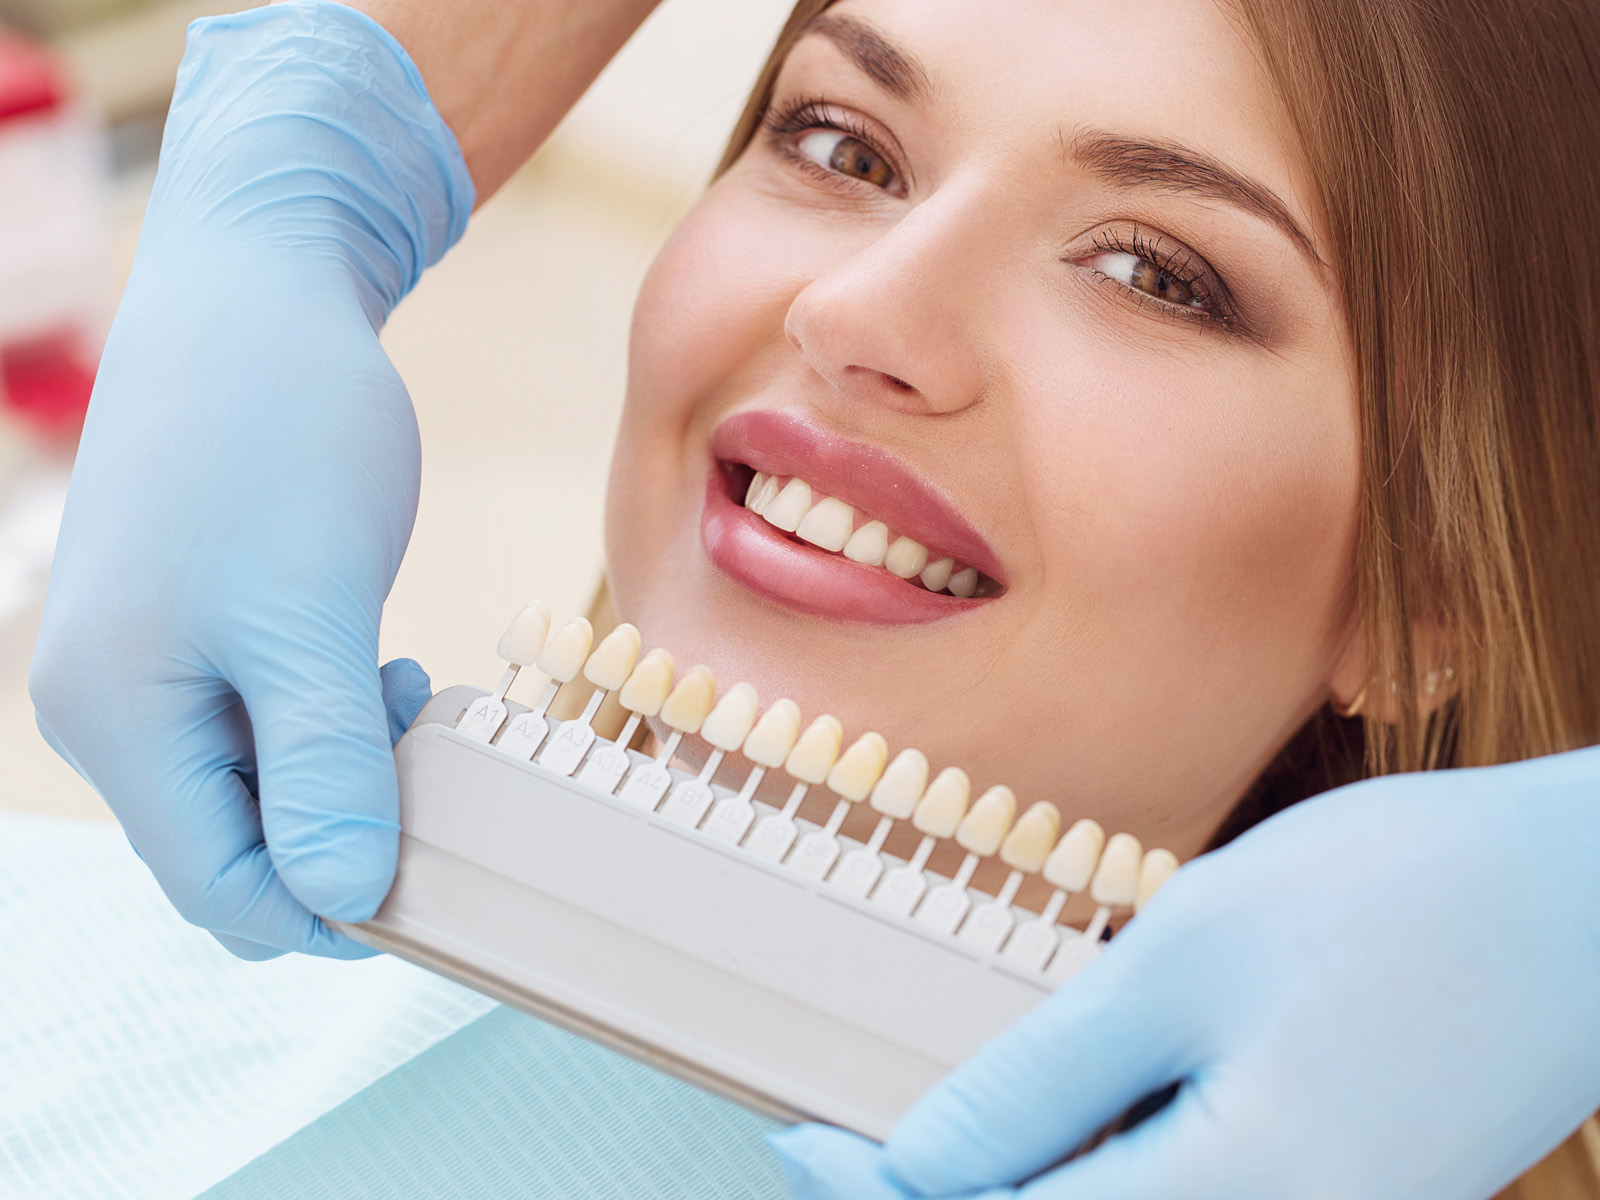 How Can I Keep My Veneers In Good Condition?